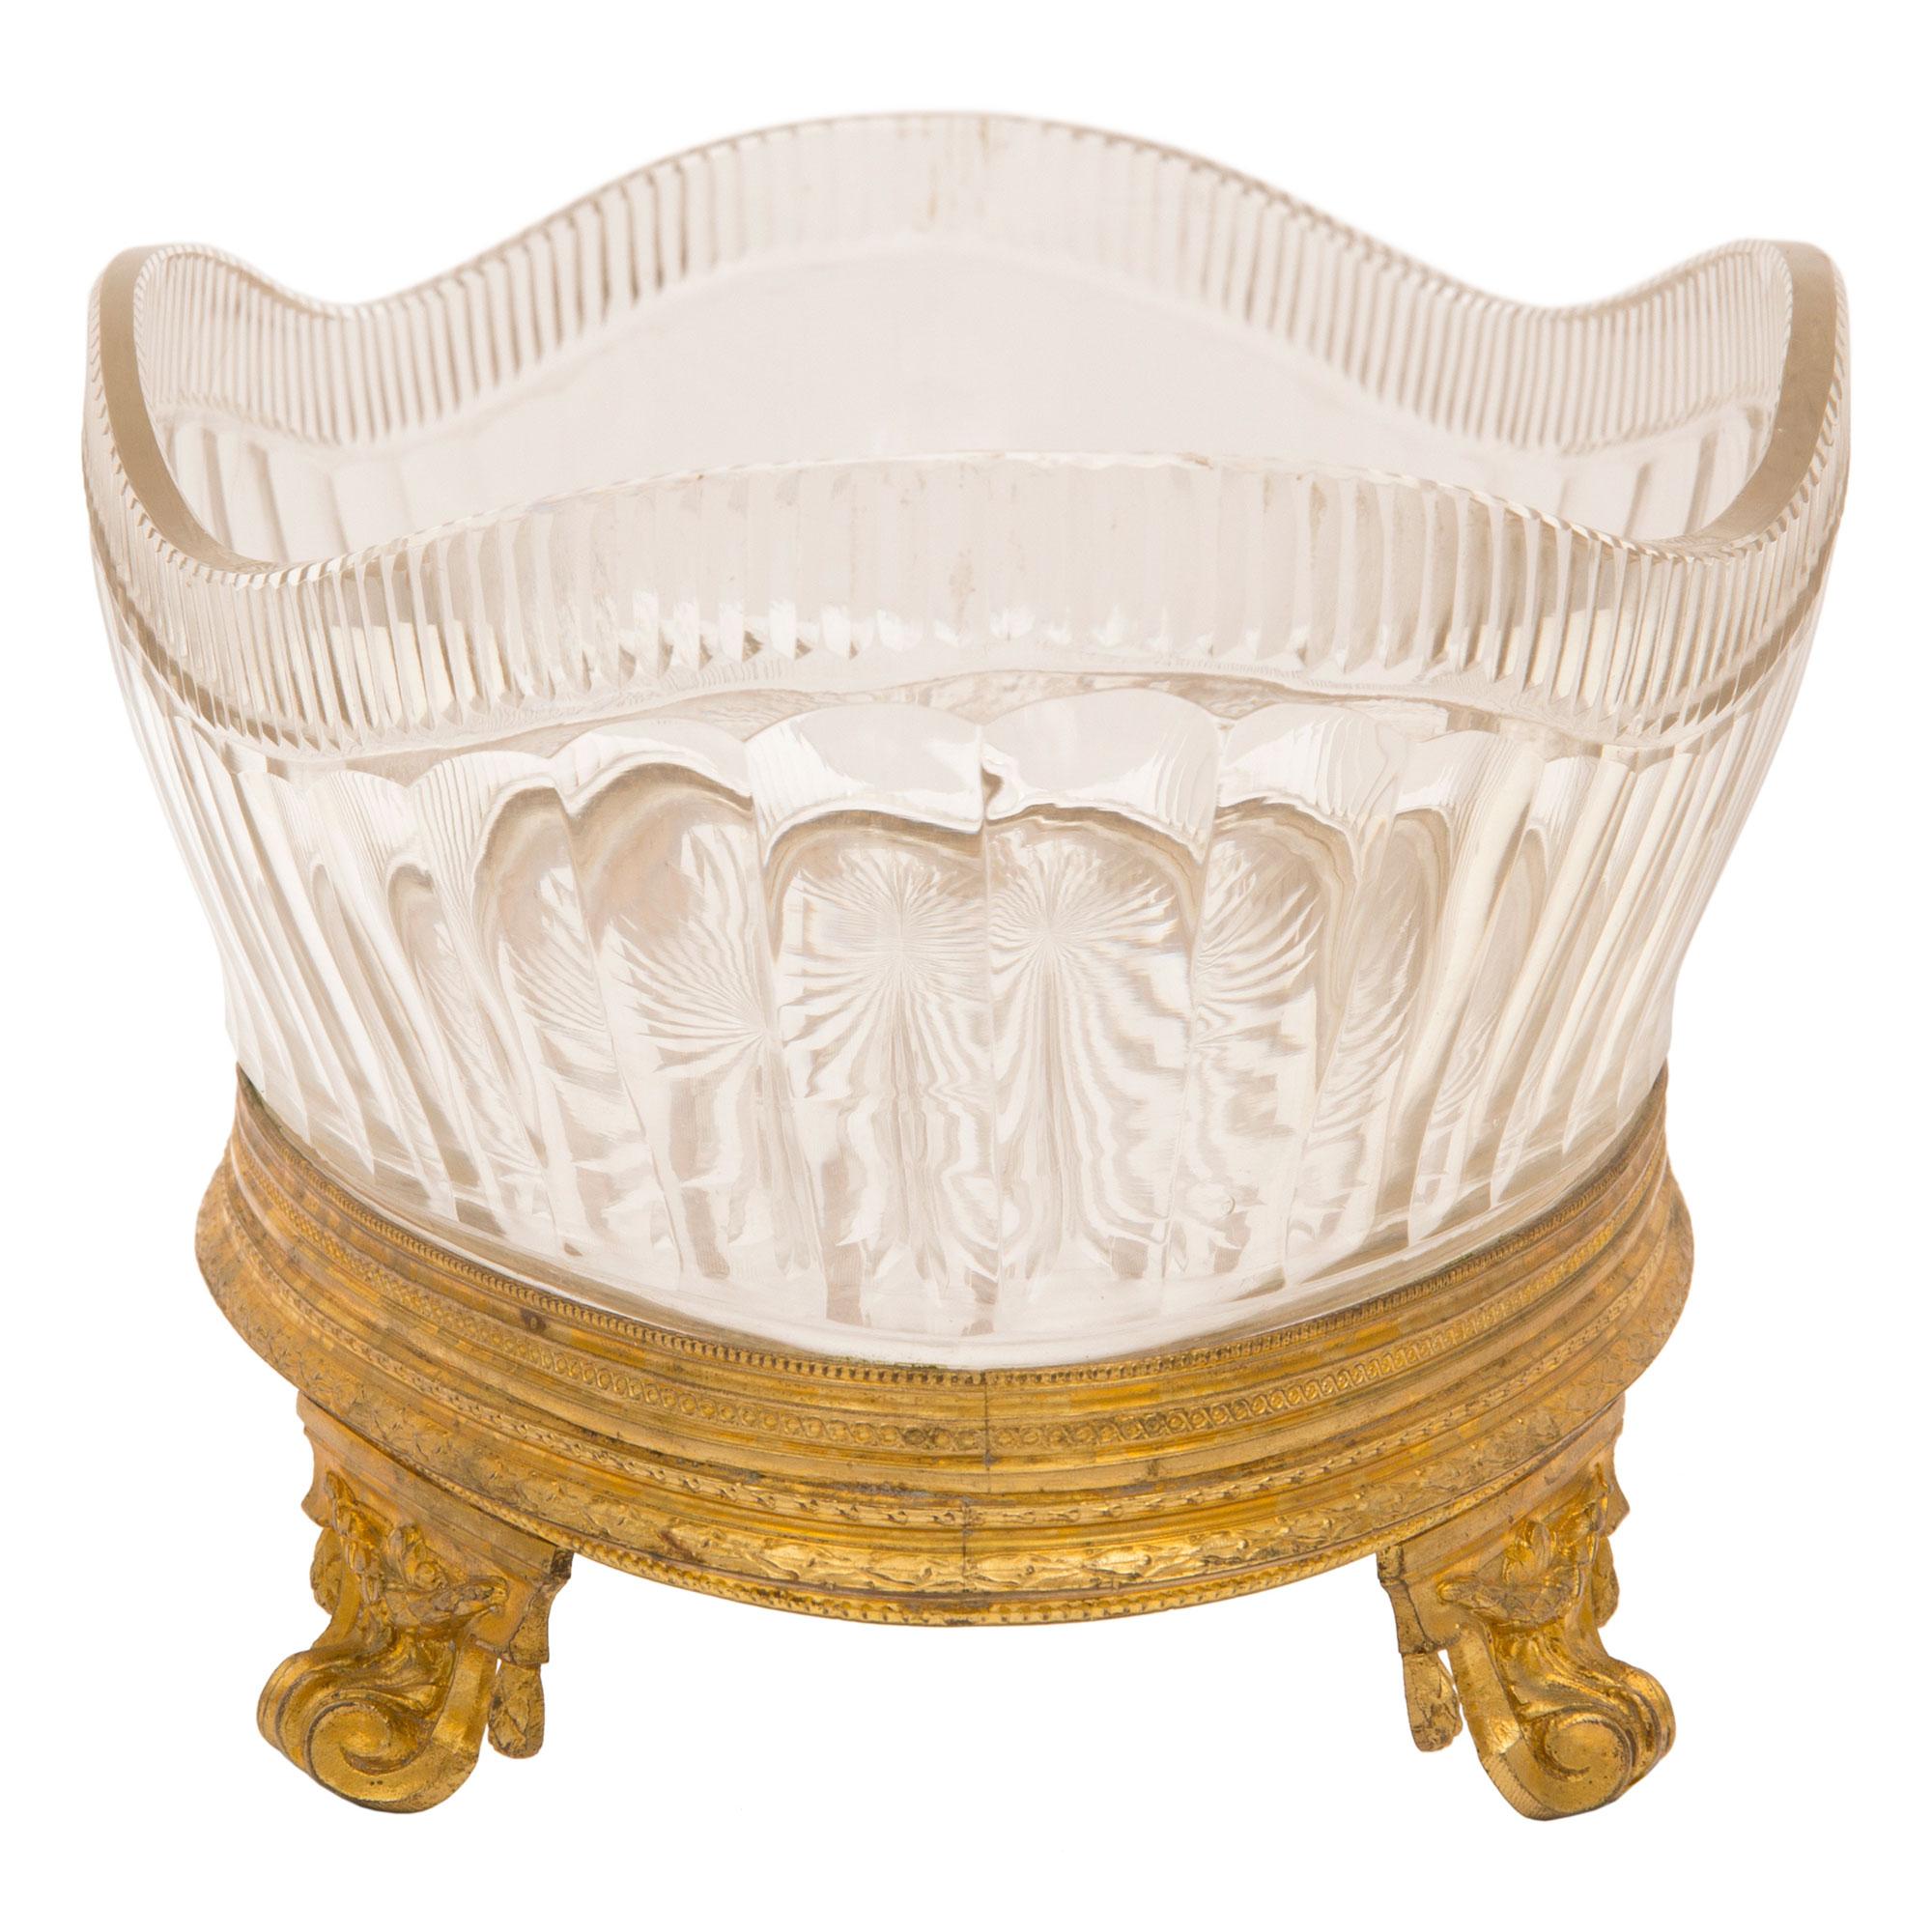 Crystal French 19th Century Louis XVI Style Oval Shaped Centerpiece Bowl For Sale